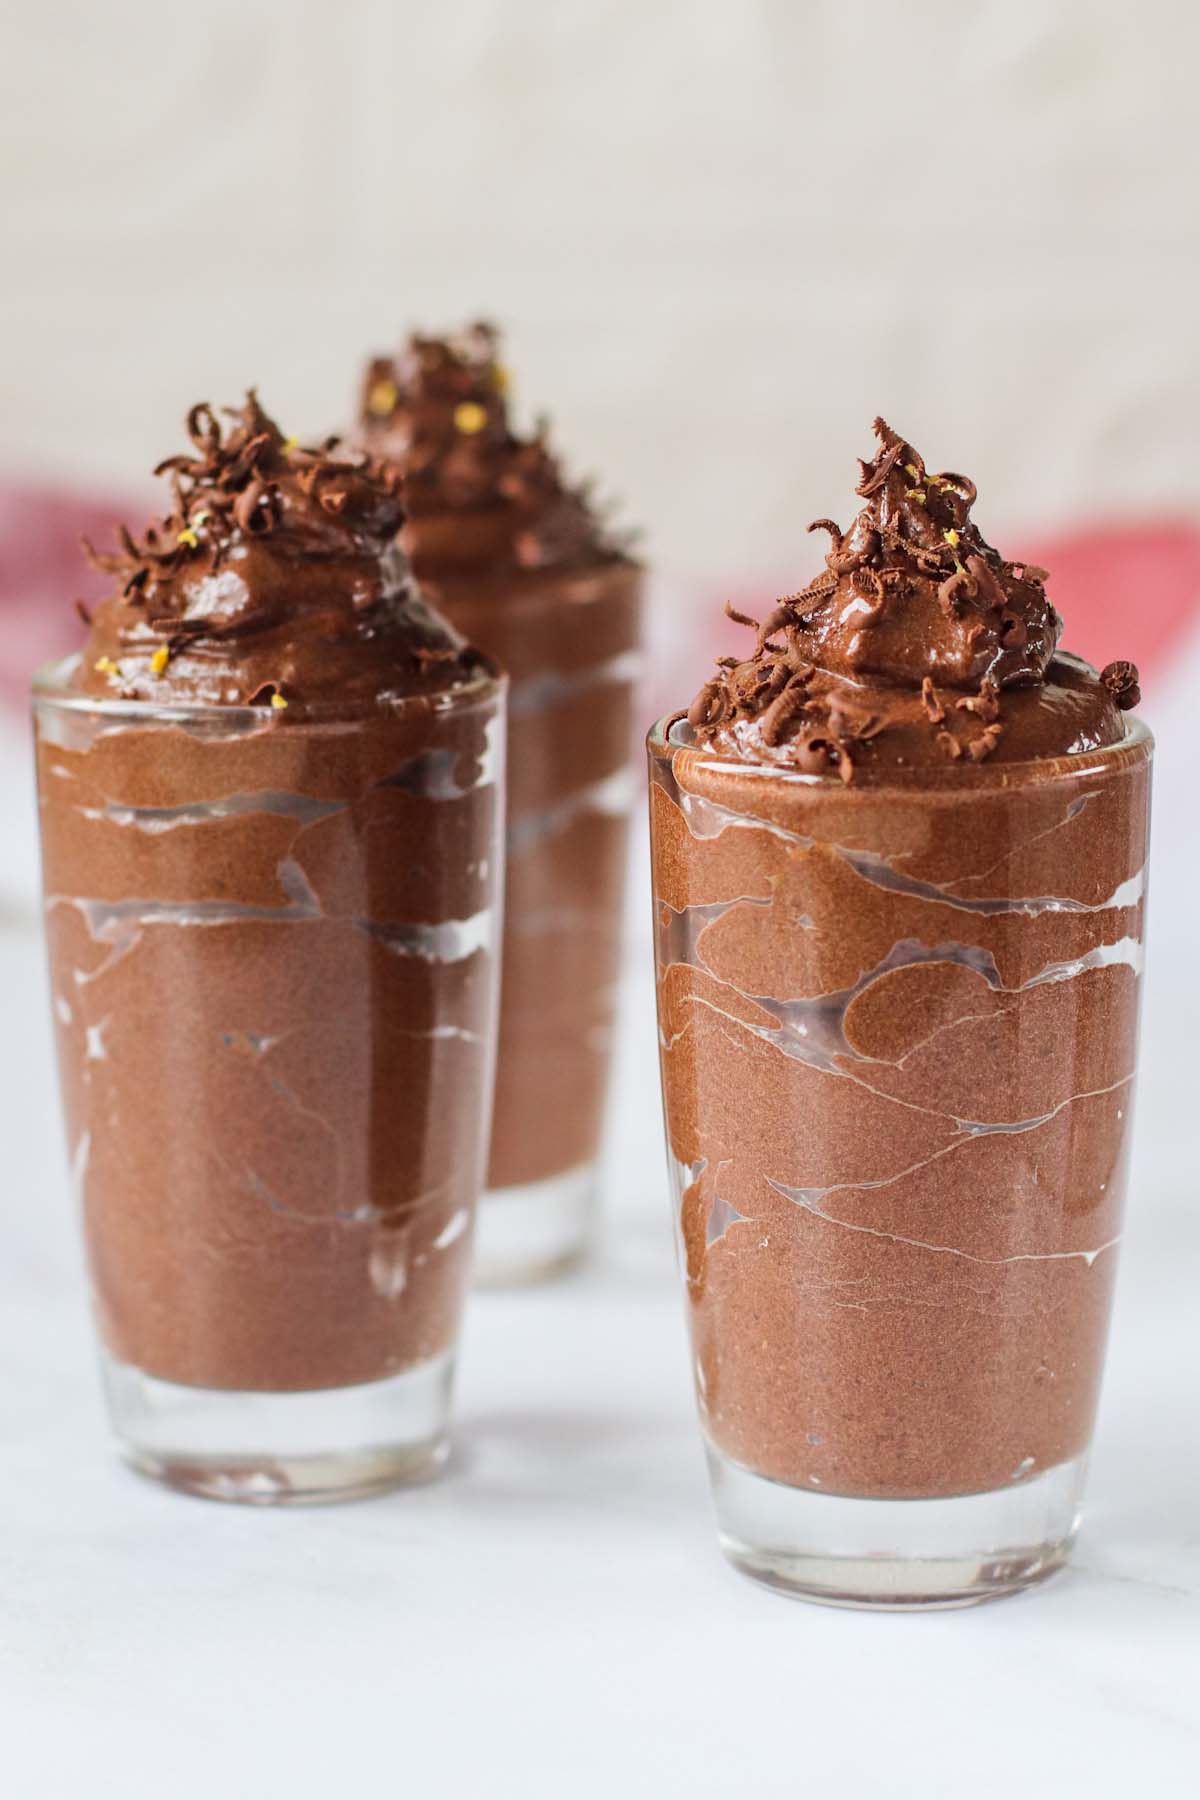 Chocolate mousse in glasses topped with shaved chocolate.